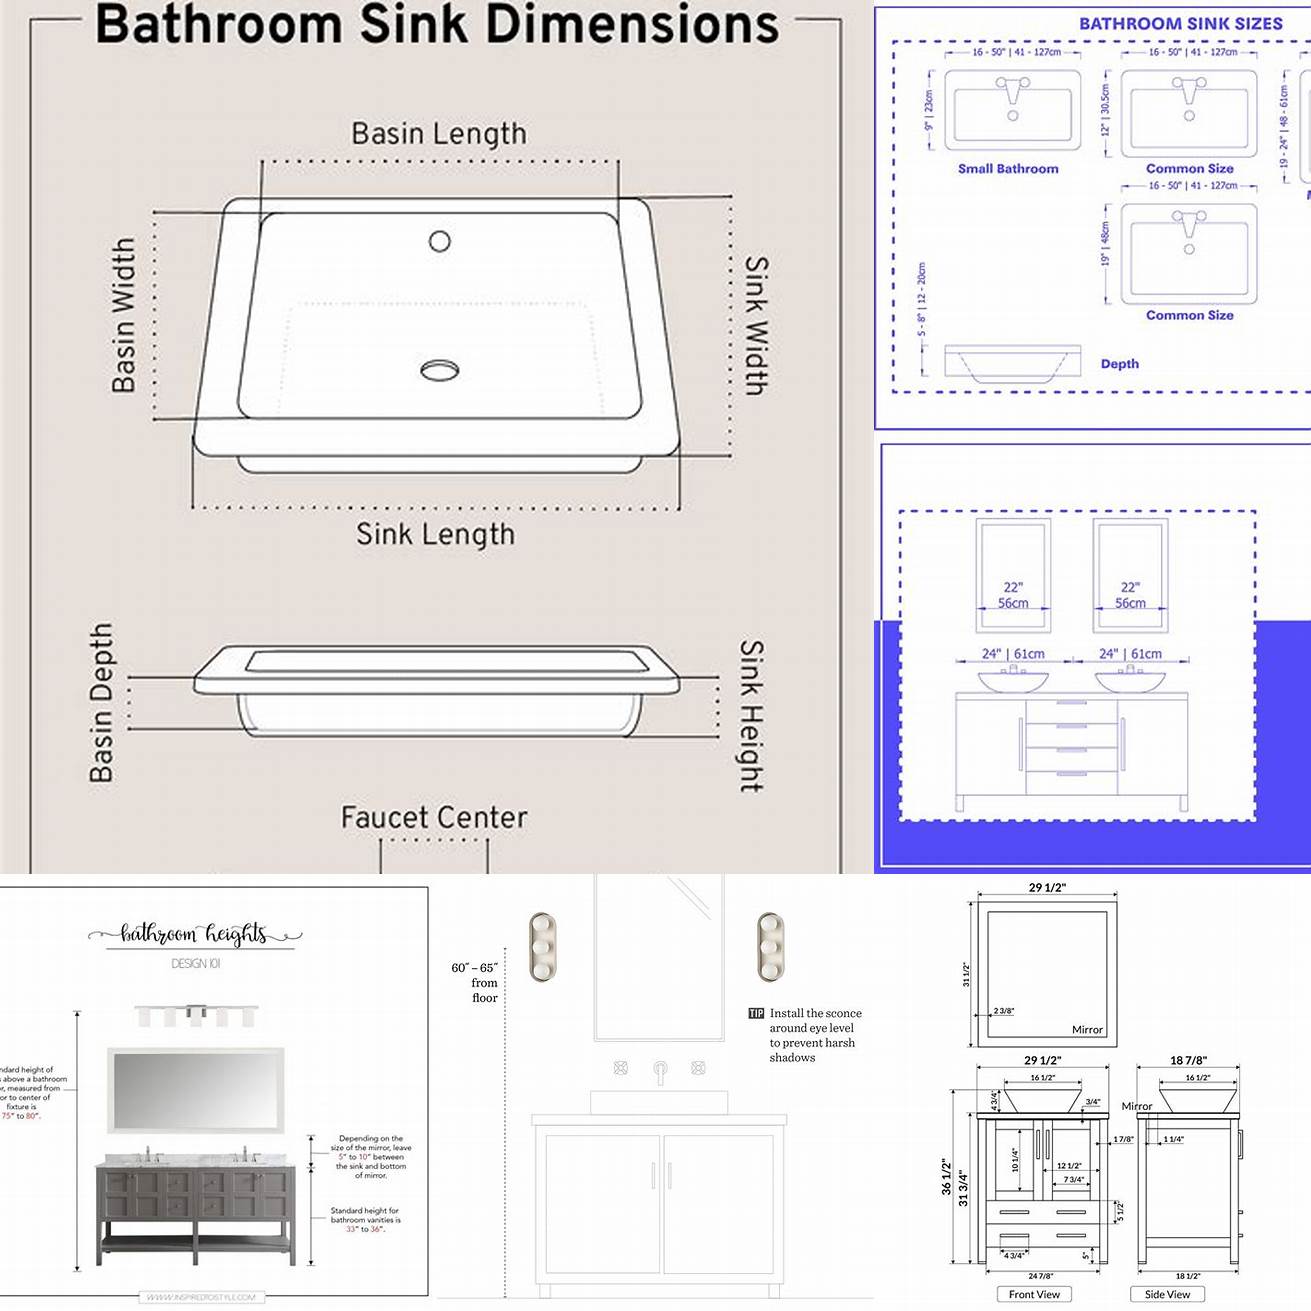 Measure your bathroom space before purchasing to ensure that a 42-inch vanity is the right size